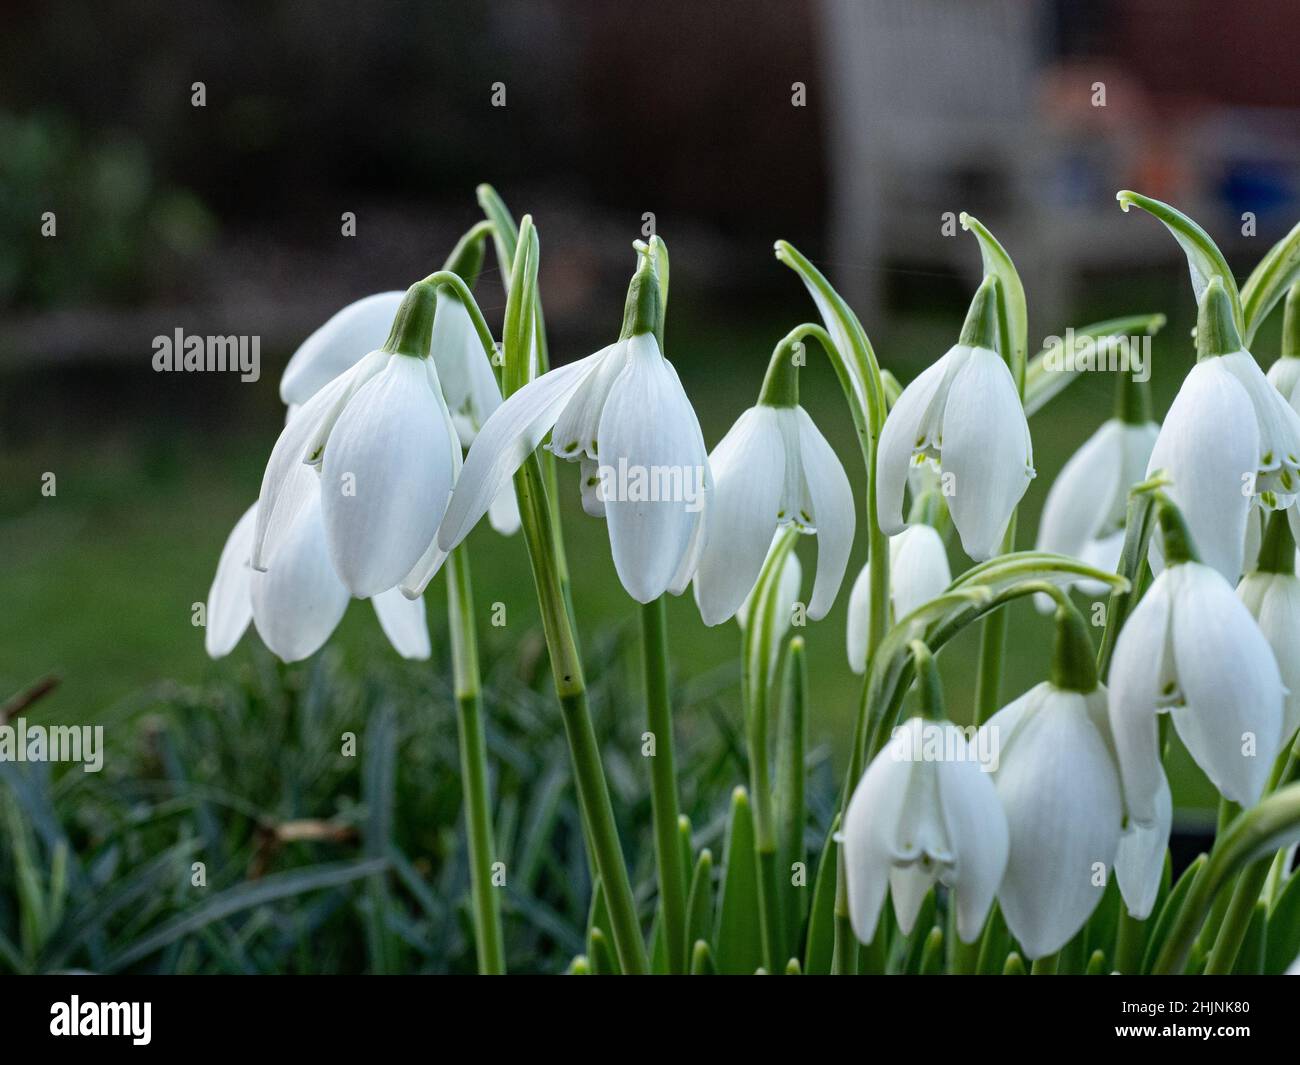 A close up of a group of the double white green tipped flowers of Galanthus 'Lady Beatrix Stanley' Stock Photo